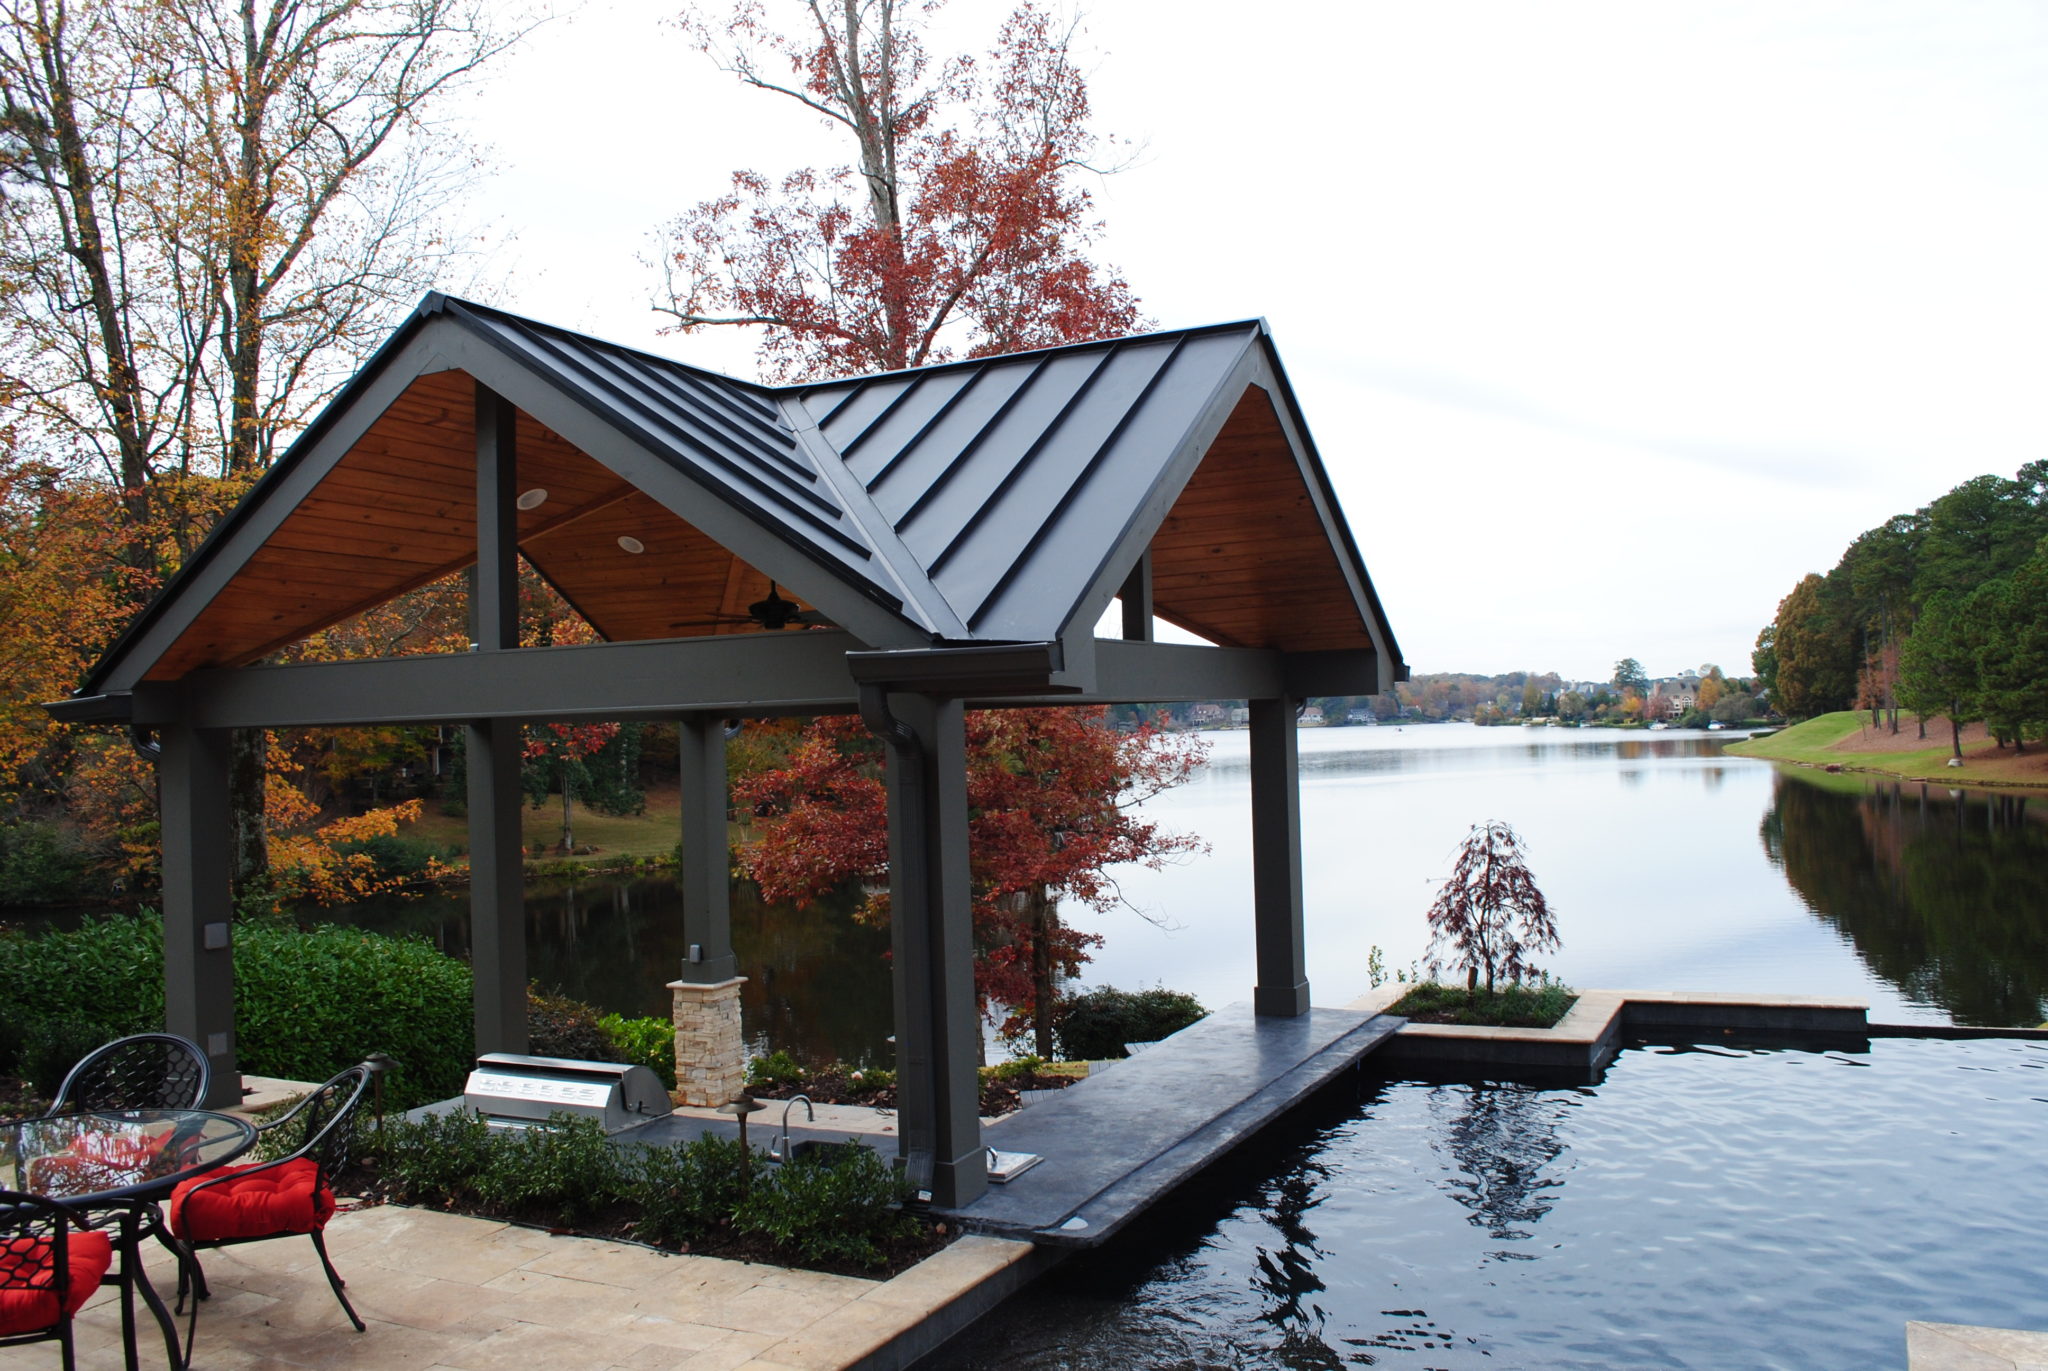 A serene lakeside scene featuring a detailed wood vaulted cabana overlooking the water.